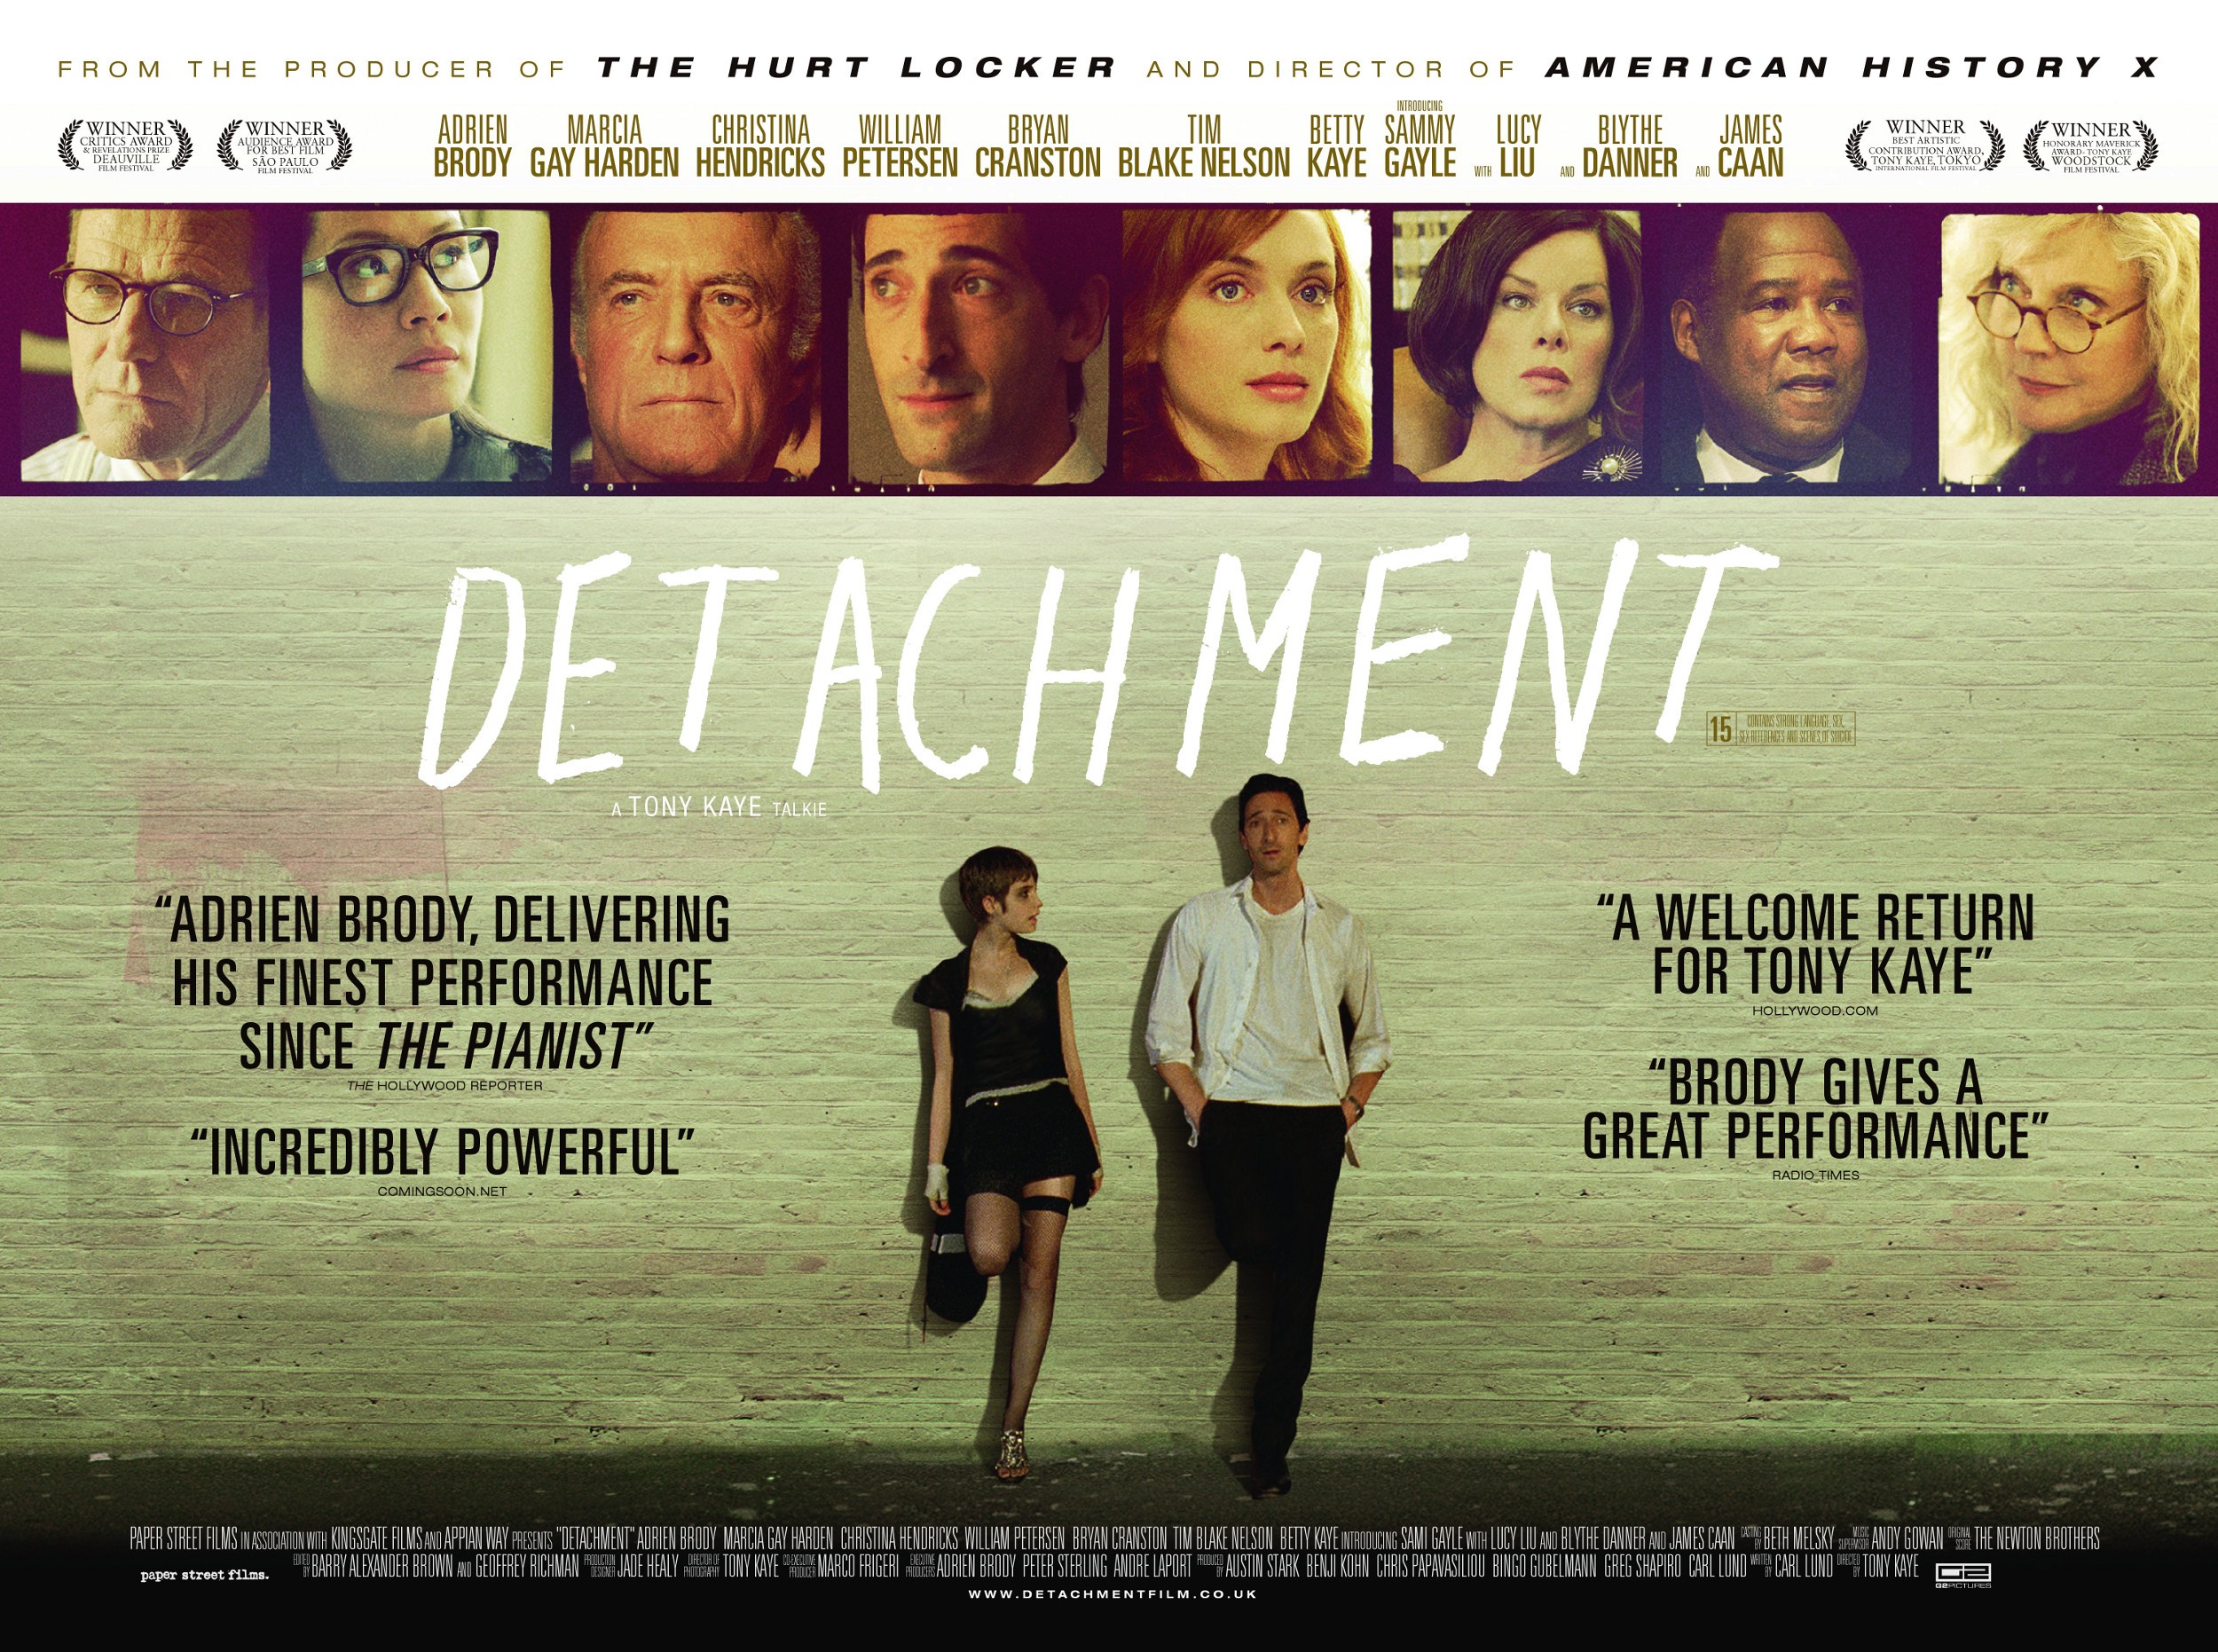 Mega Sized Movie Poster Image for Detachment (#5 of 5)